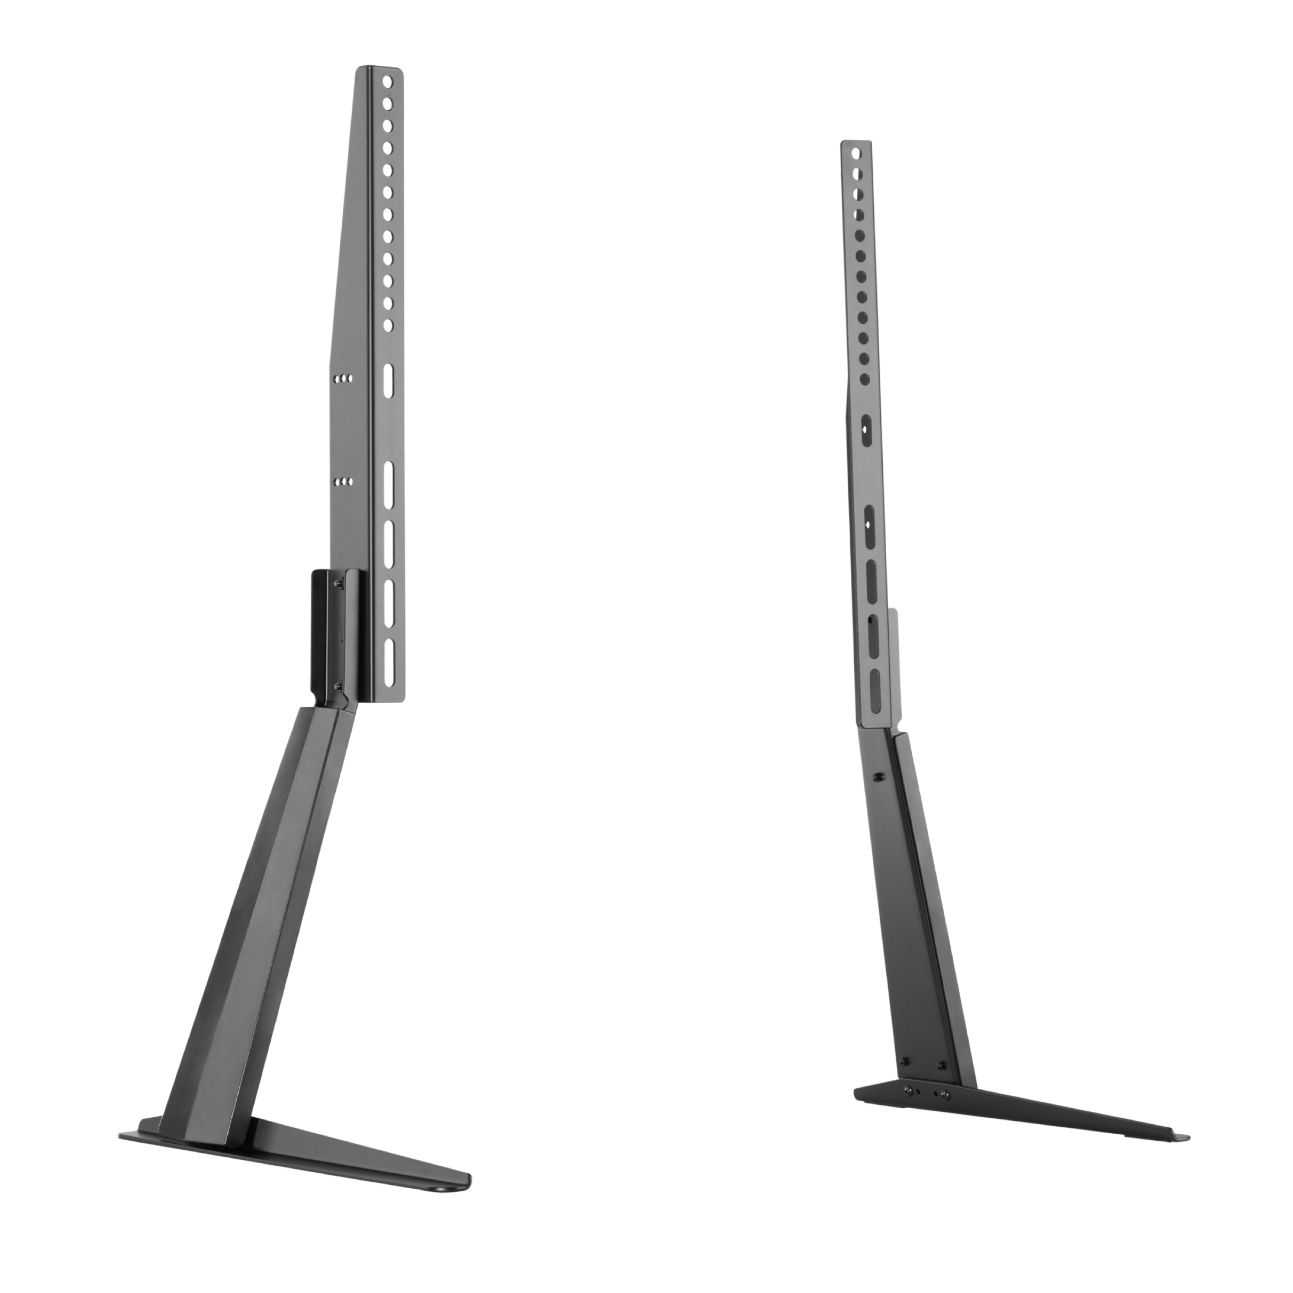 Pro 3270 – Universal Table Stand For Led Display 32" To 70" (Jl41880 –  Jl41880) – Gbc Elettronica Pertaining To Universal Tabletop Tv Stands (View 11 of 15)